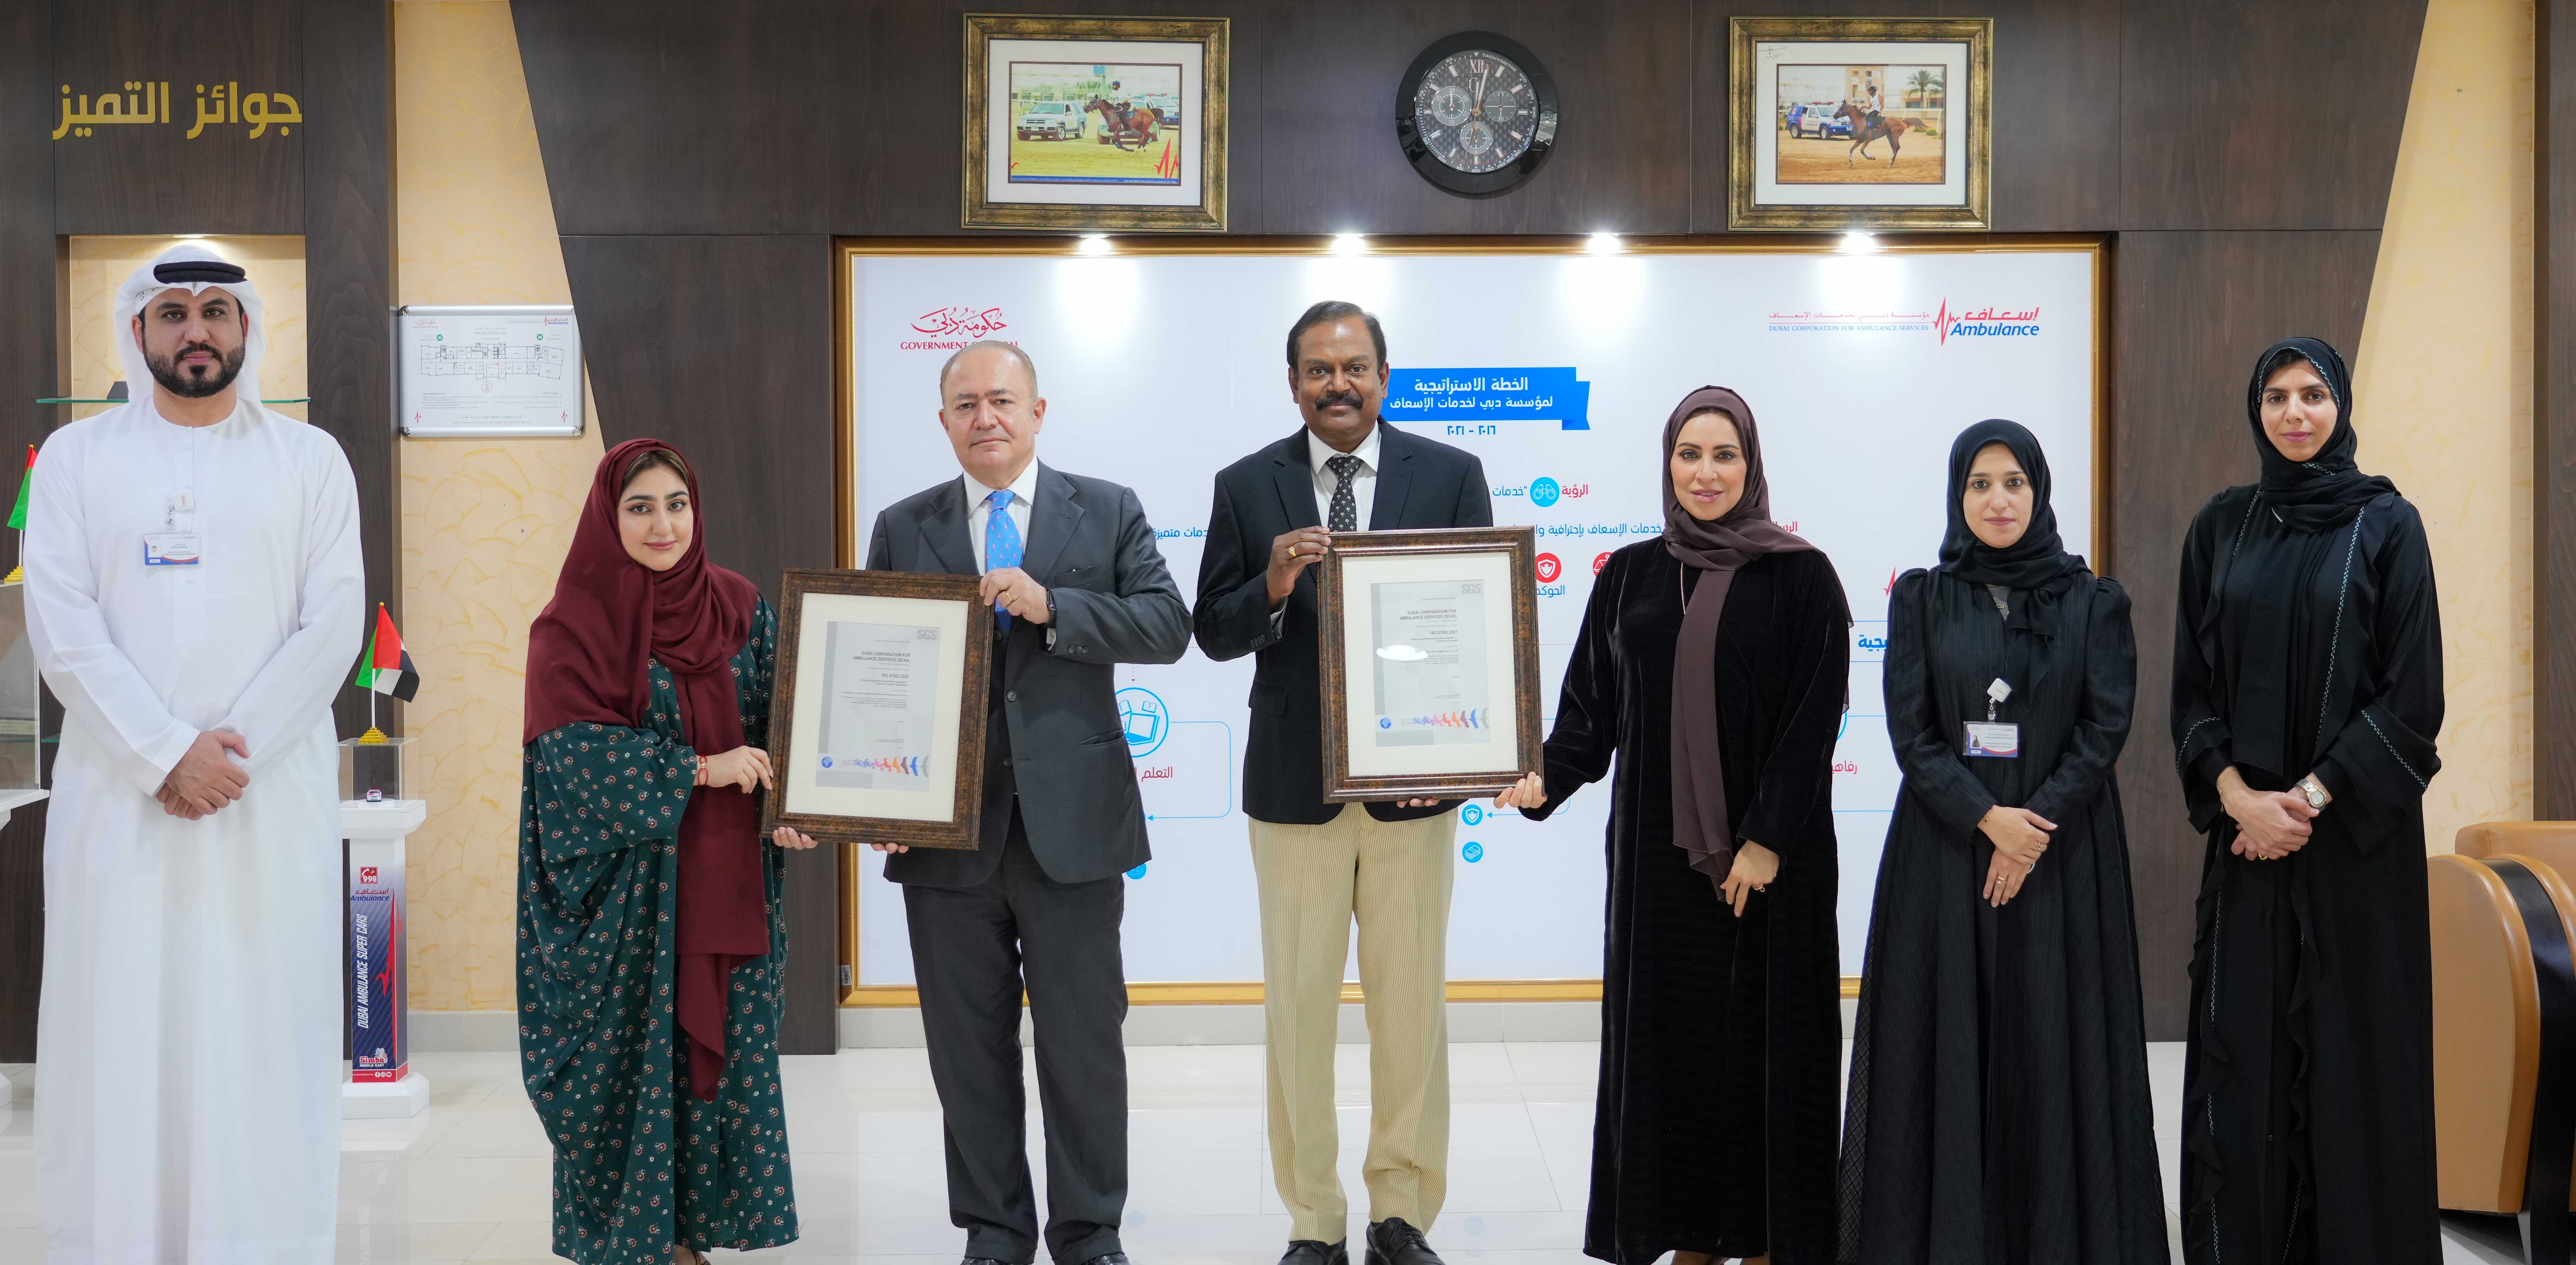 Dubai Ambulance receives ISO 21500, ISO 21502 certificates from SGS